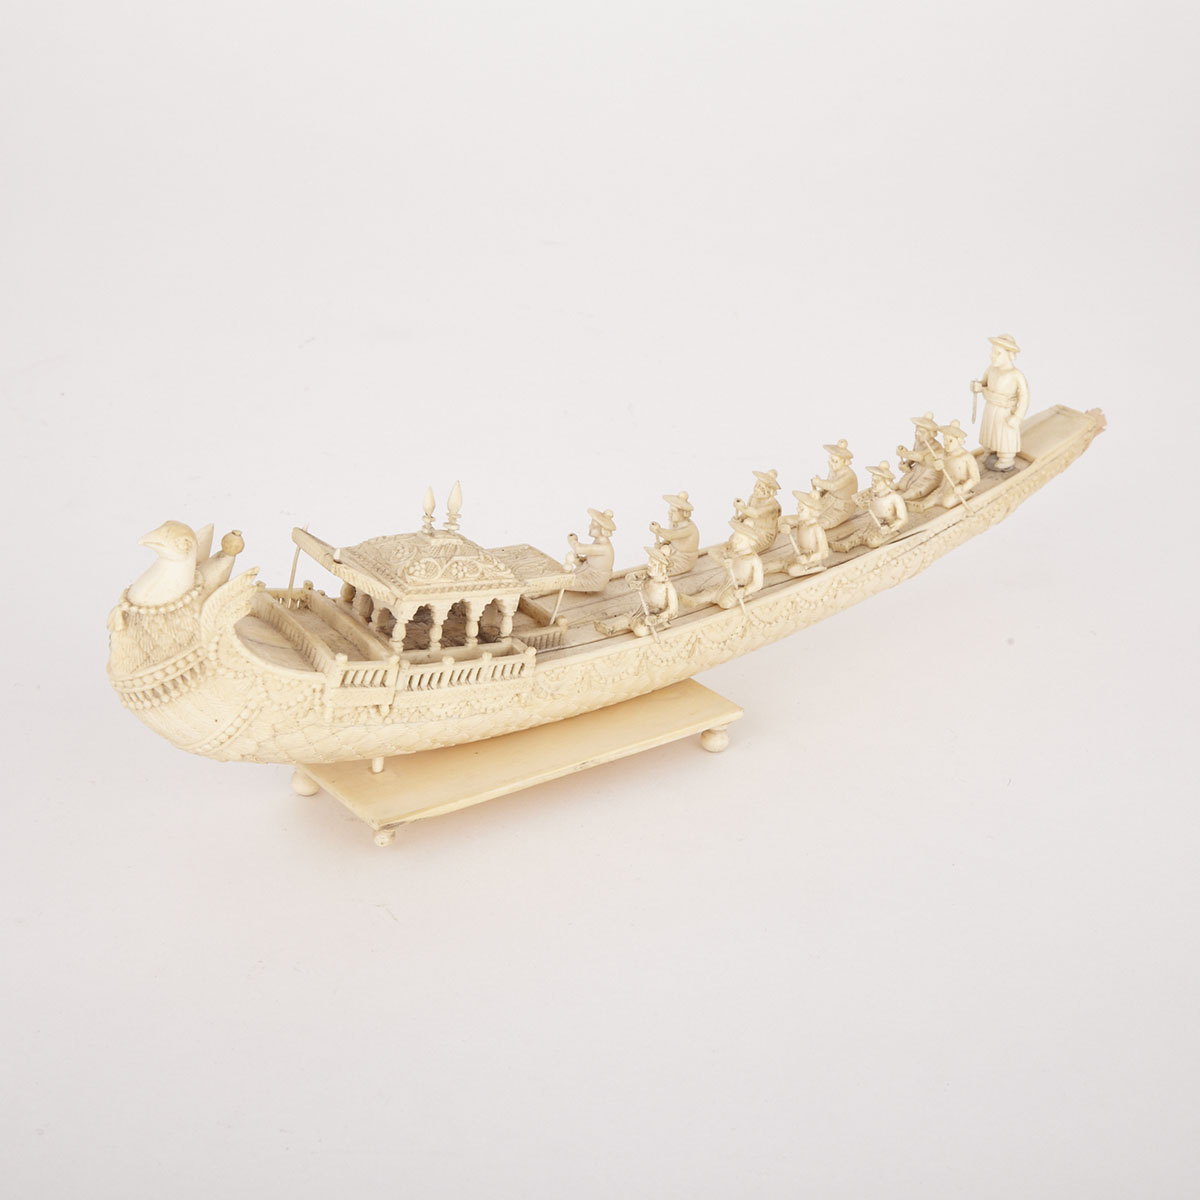 Carved Ivory Phoenix Boat with Figures, 19th Century